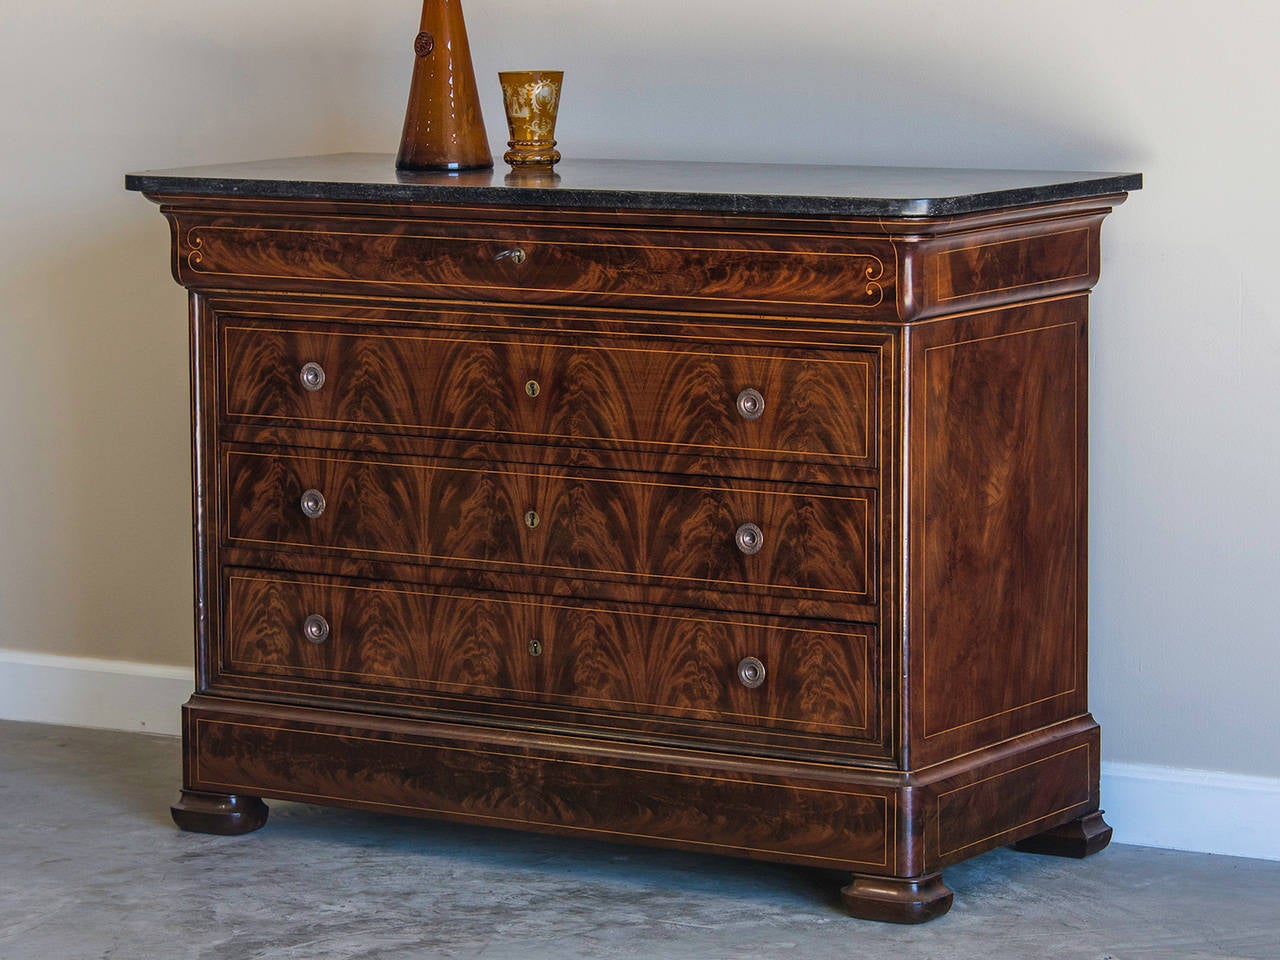 Louis Philippe mahogany chest of drawers, beech inlay, marble top, France, circa 1840. The extraordinary grain of the mahogany on this chest has been carefully matched to create the pattern of an upward Cascade with an enchanting variation in the